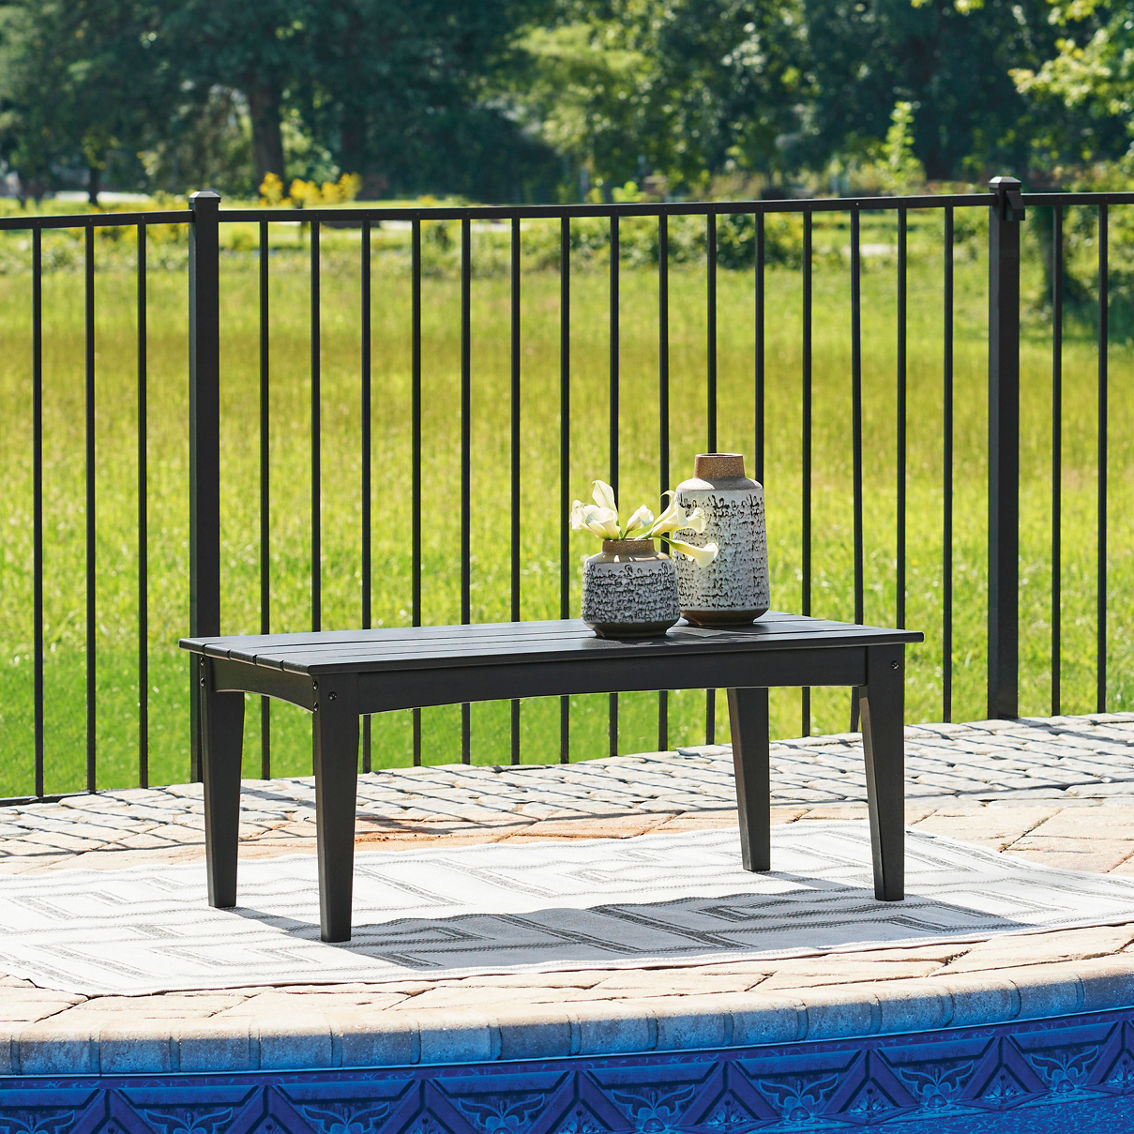 Signature Design by Ashley Hyland Wave Outdoor Coffee Table - Image 4 of 5